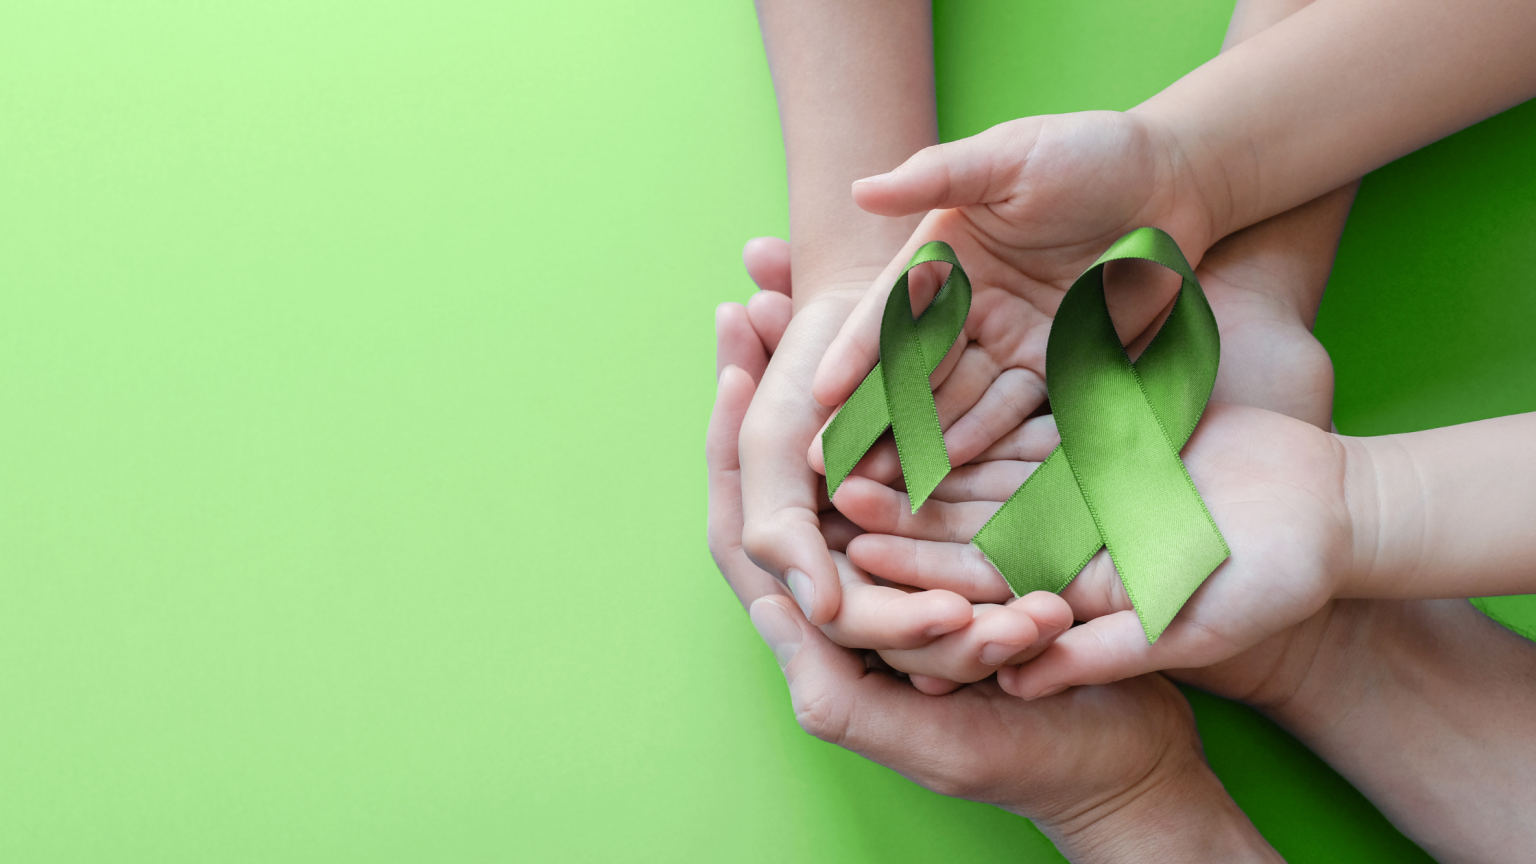 Mother and young daughter holding green ribbons in hand over green background in honor of Mental Health Awareness month.